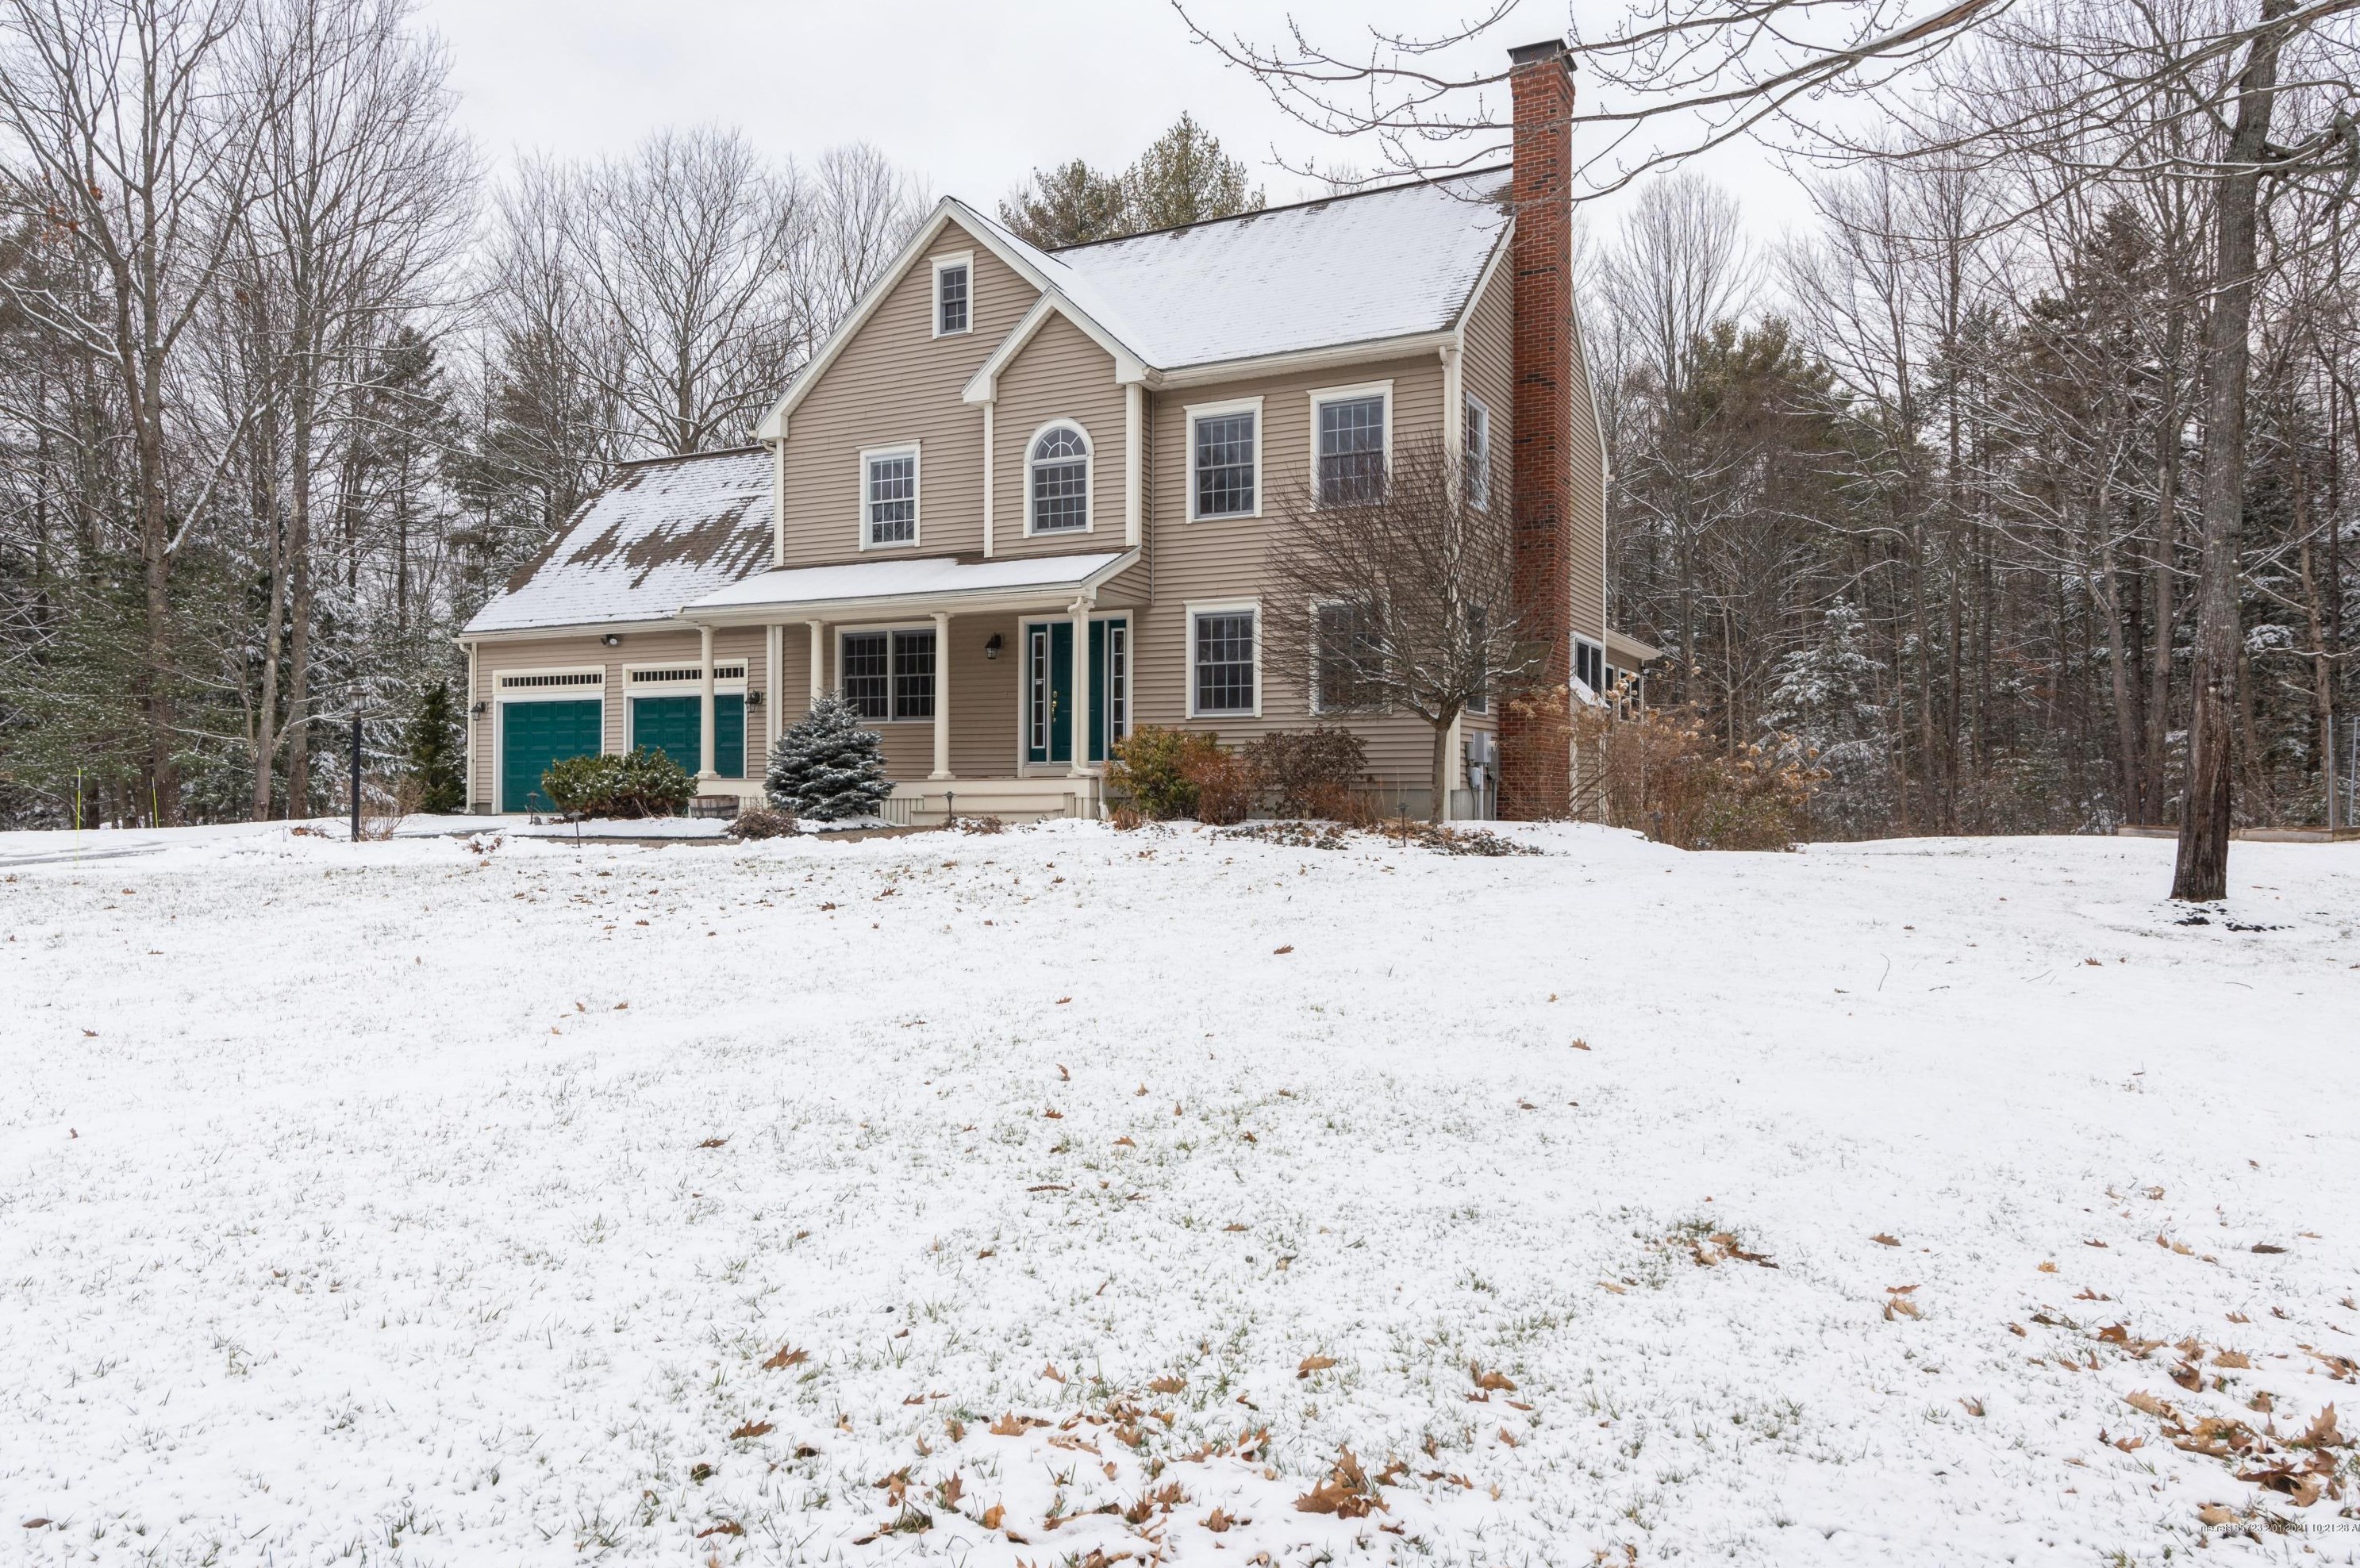 32 Woodfield Dr, Scarborough, ME 04074